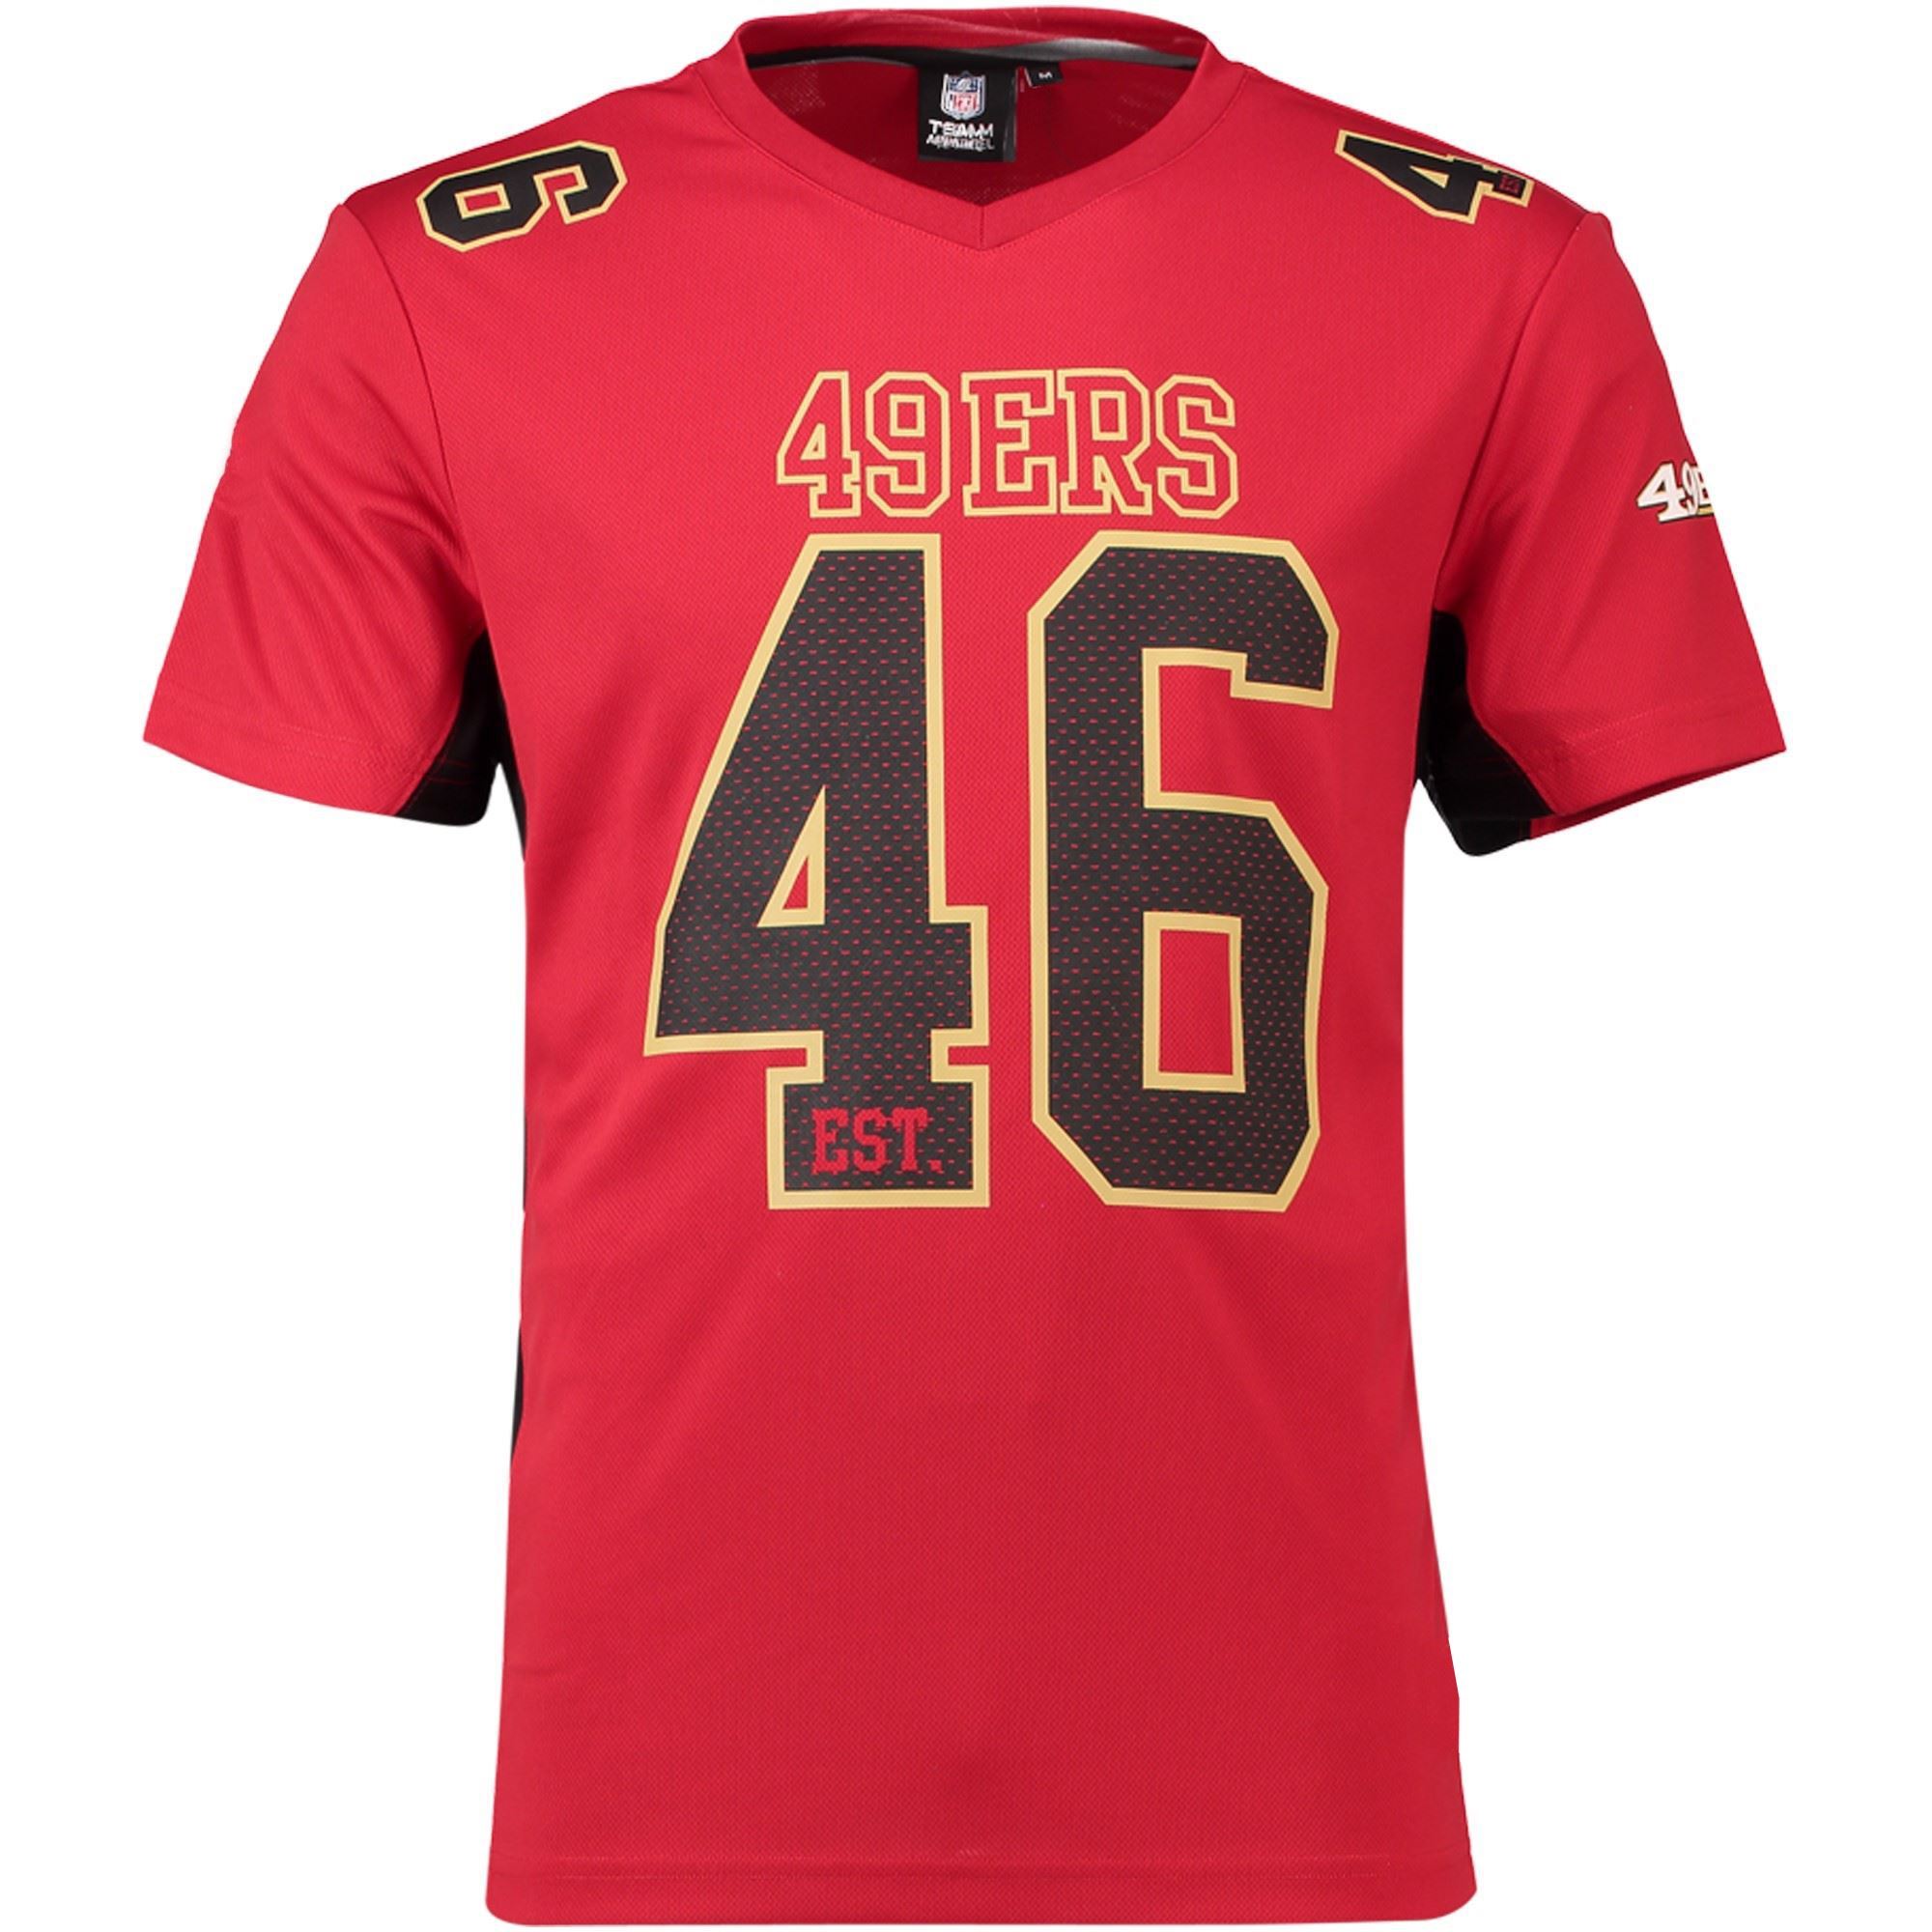 San Francisco 49ers Red NFL Poly Mesh Supporters Jersey Fanatics